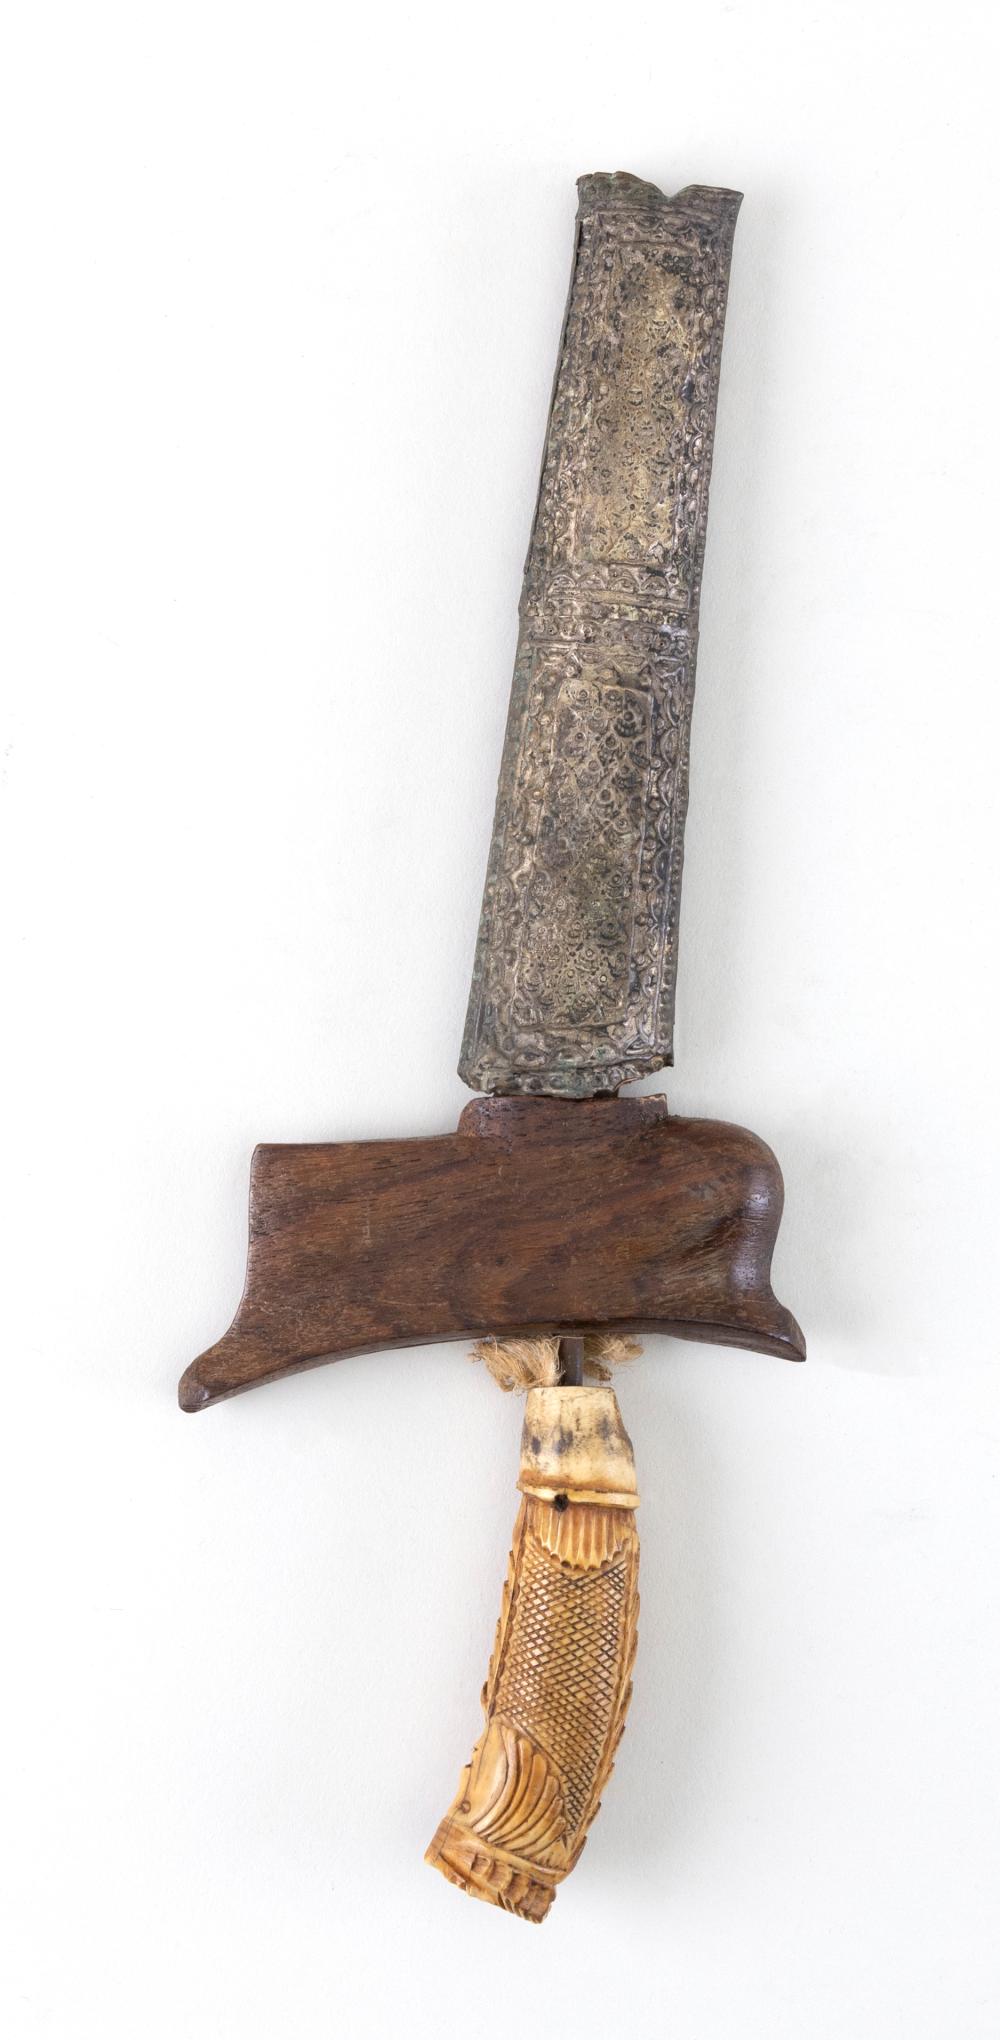 INDONESIAN KRIS WITH SCABBARD LATE